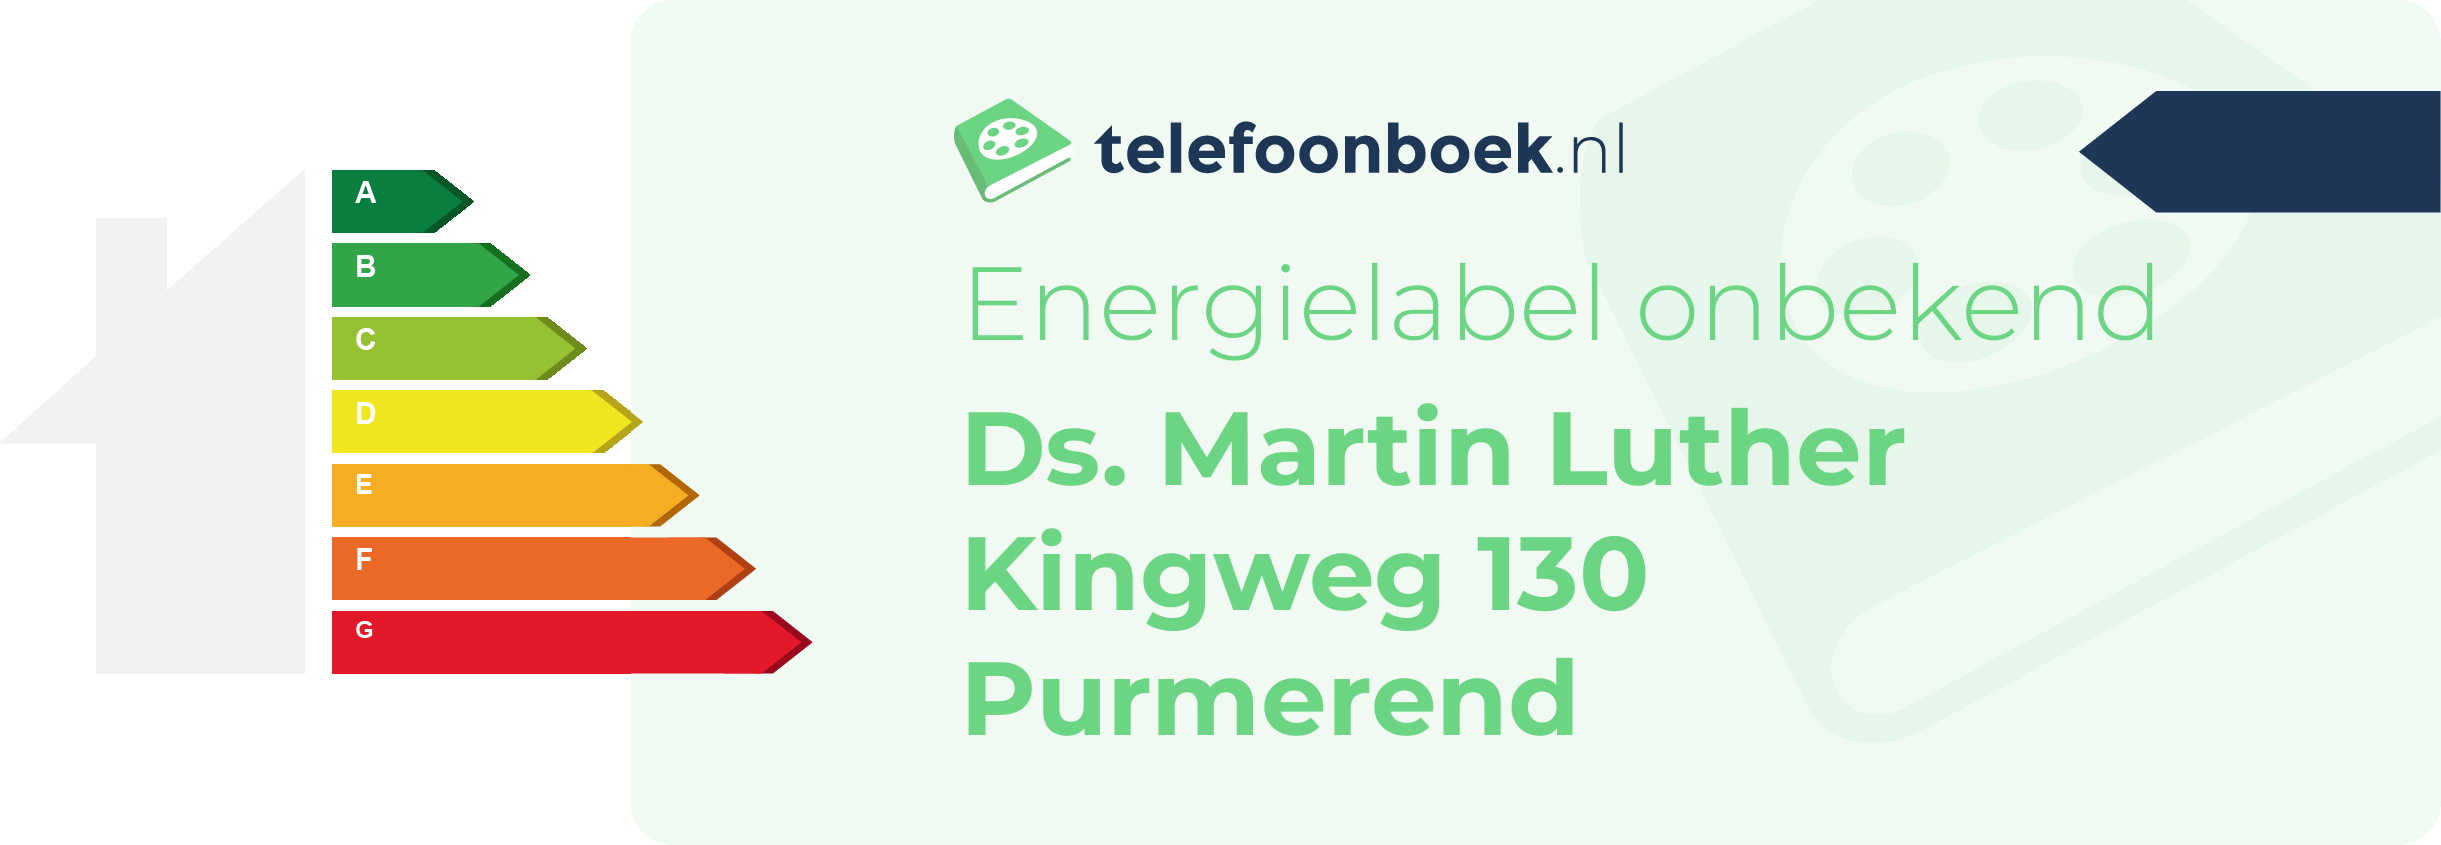 Energielabel Ds. Martin Luther Kingweg 130 Purmerend